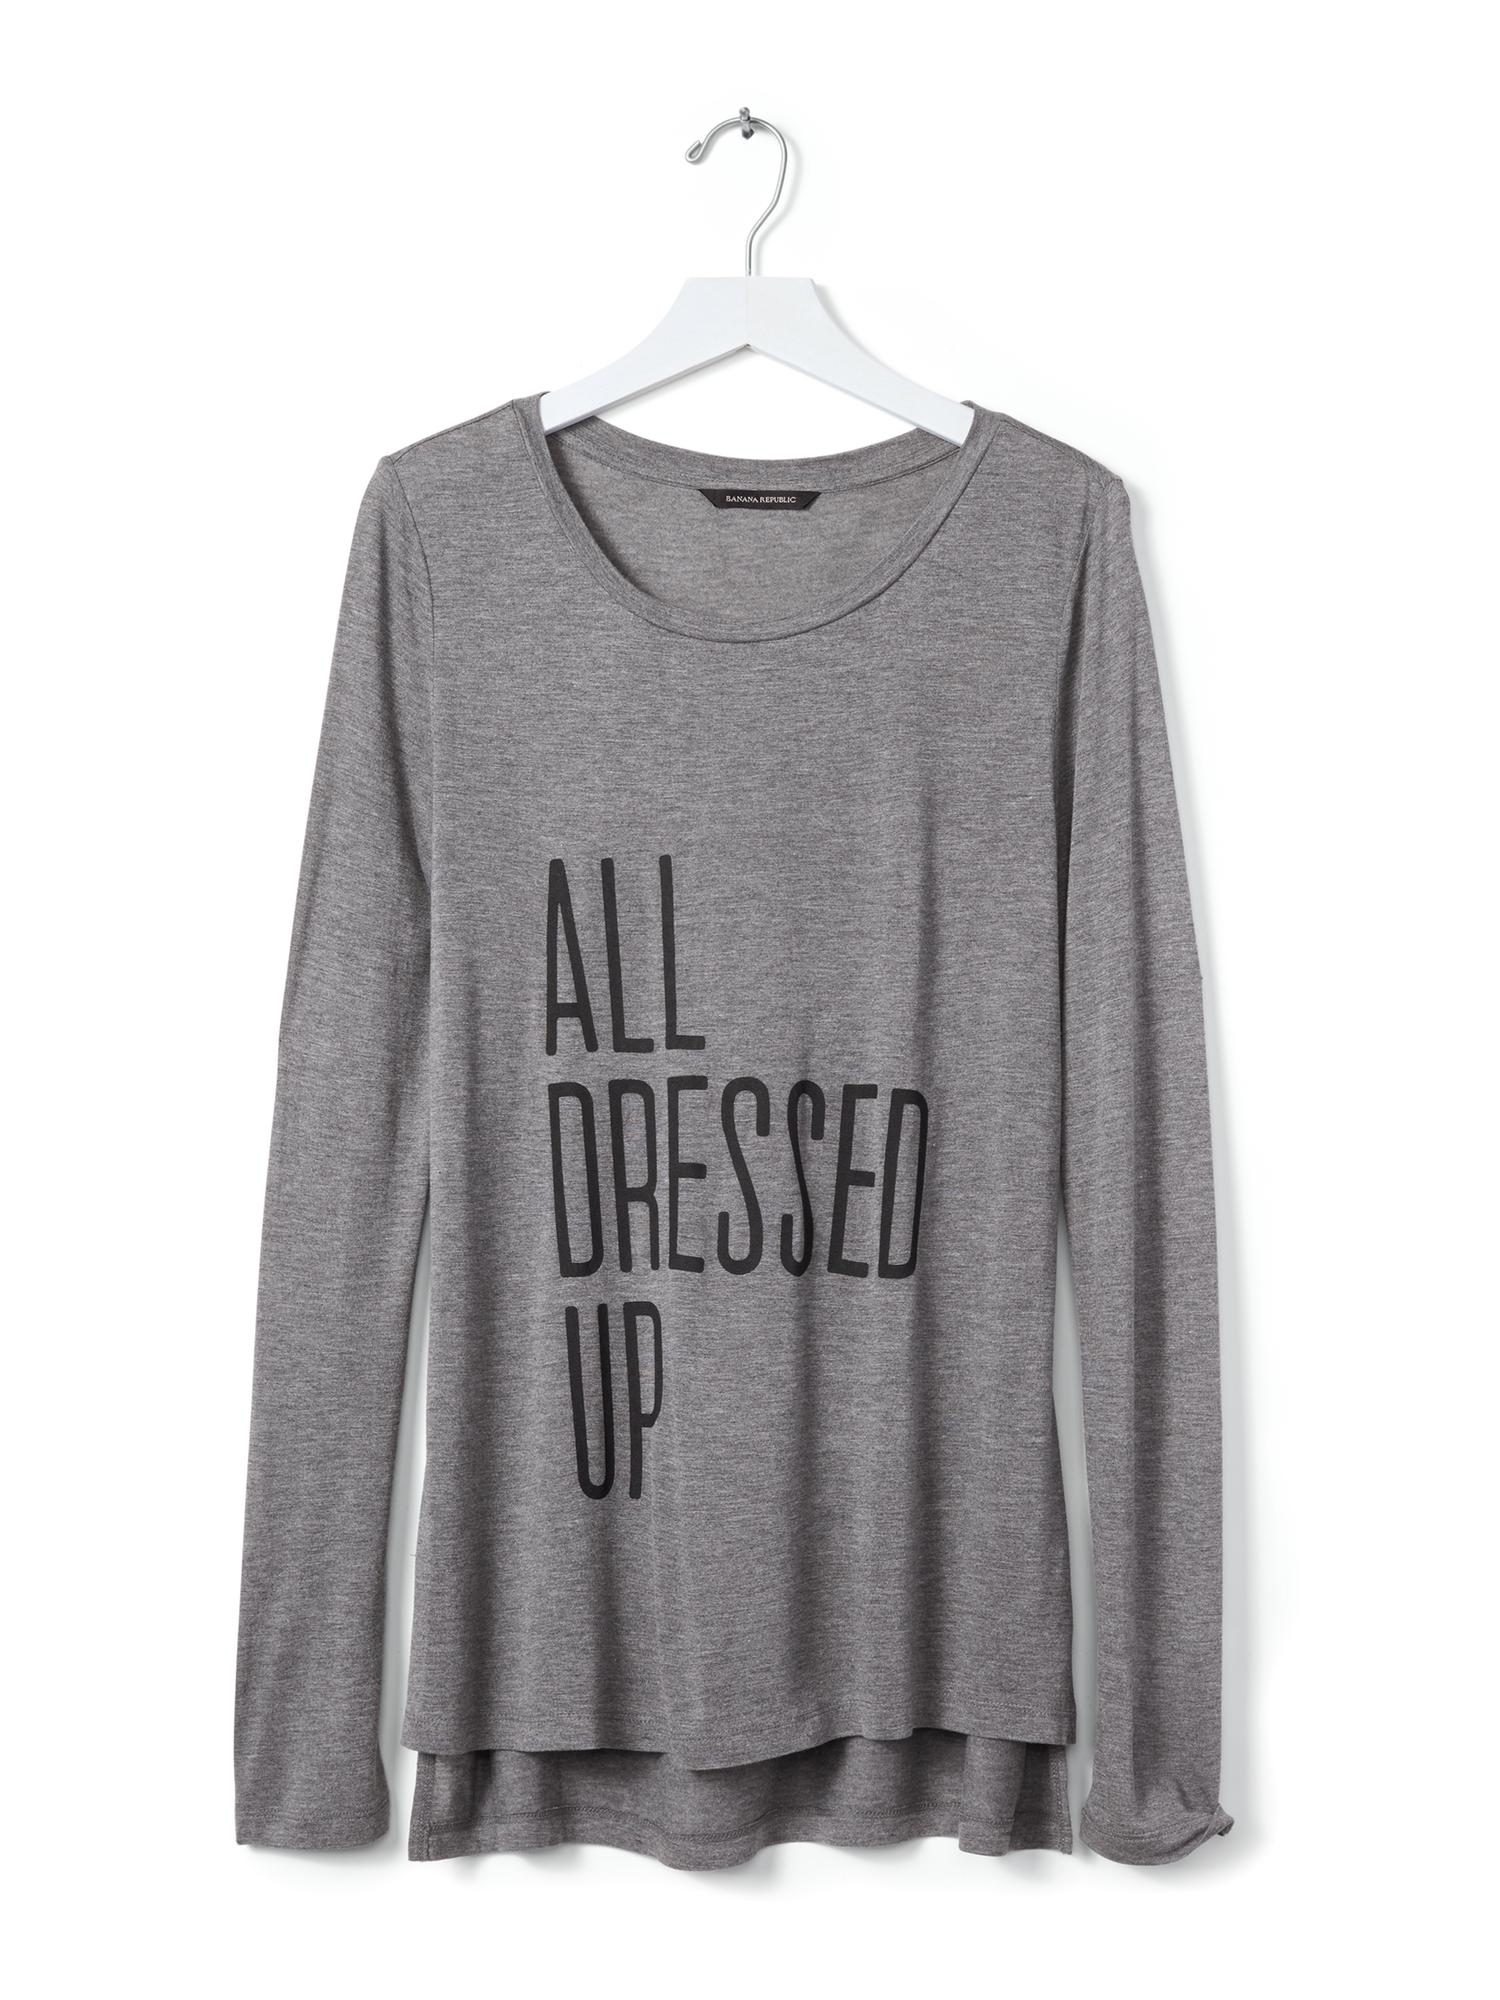 "All Dressed Up" Graphic Tee